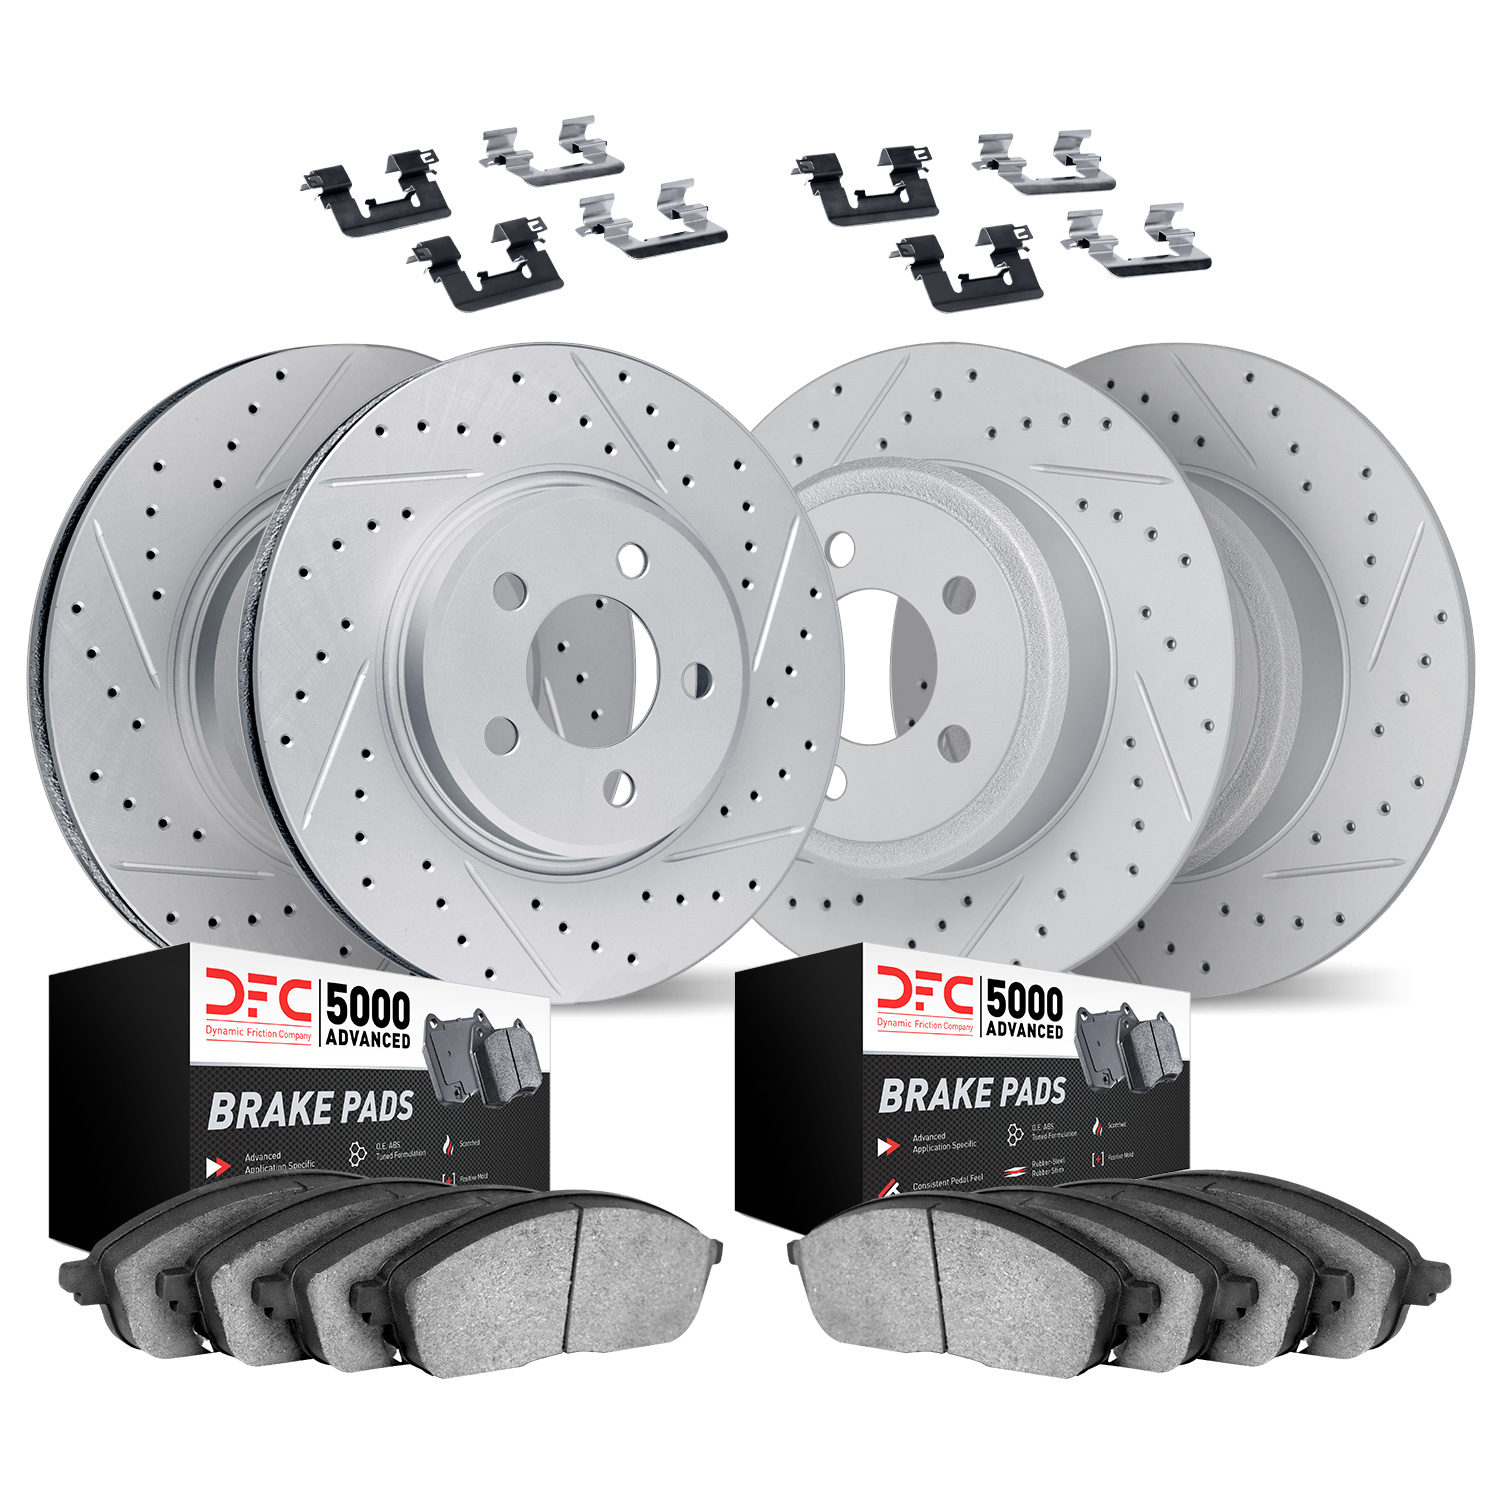 2514-27007 Geoperformance Drilled/Slotted Rotors w/5000 Advanced Brake Pads Kit & Hardware, 2004-2013 Volvo, Position: Front and